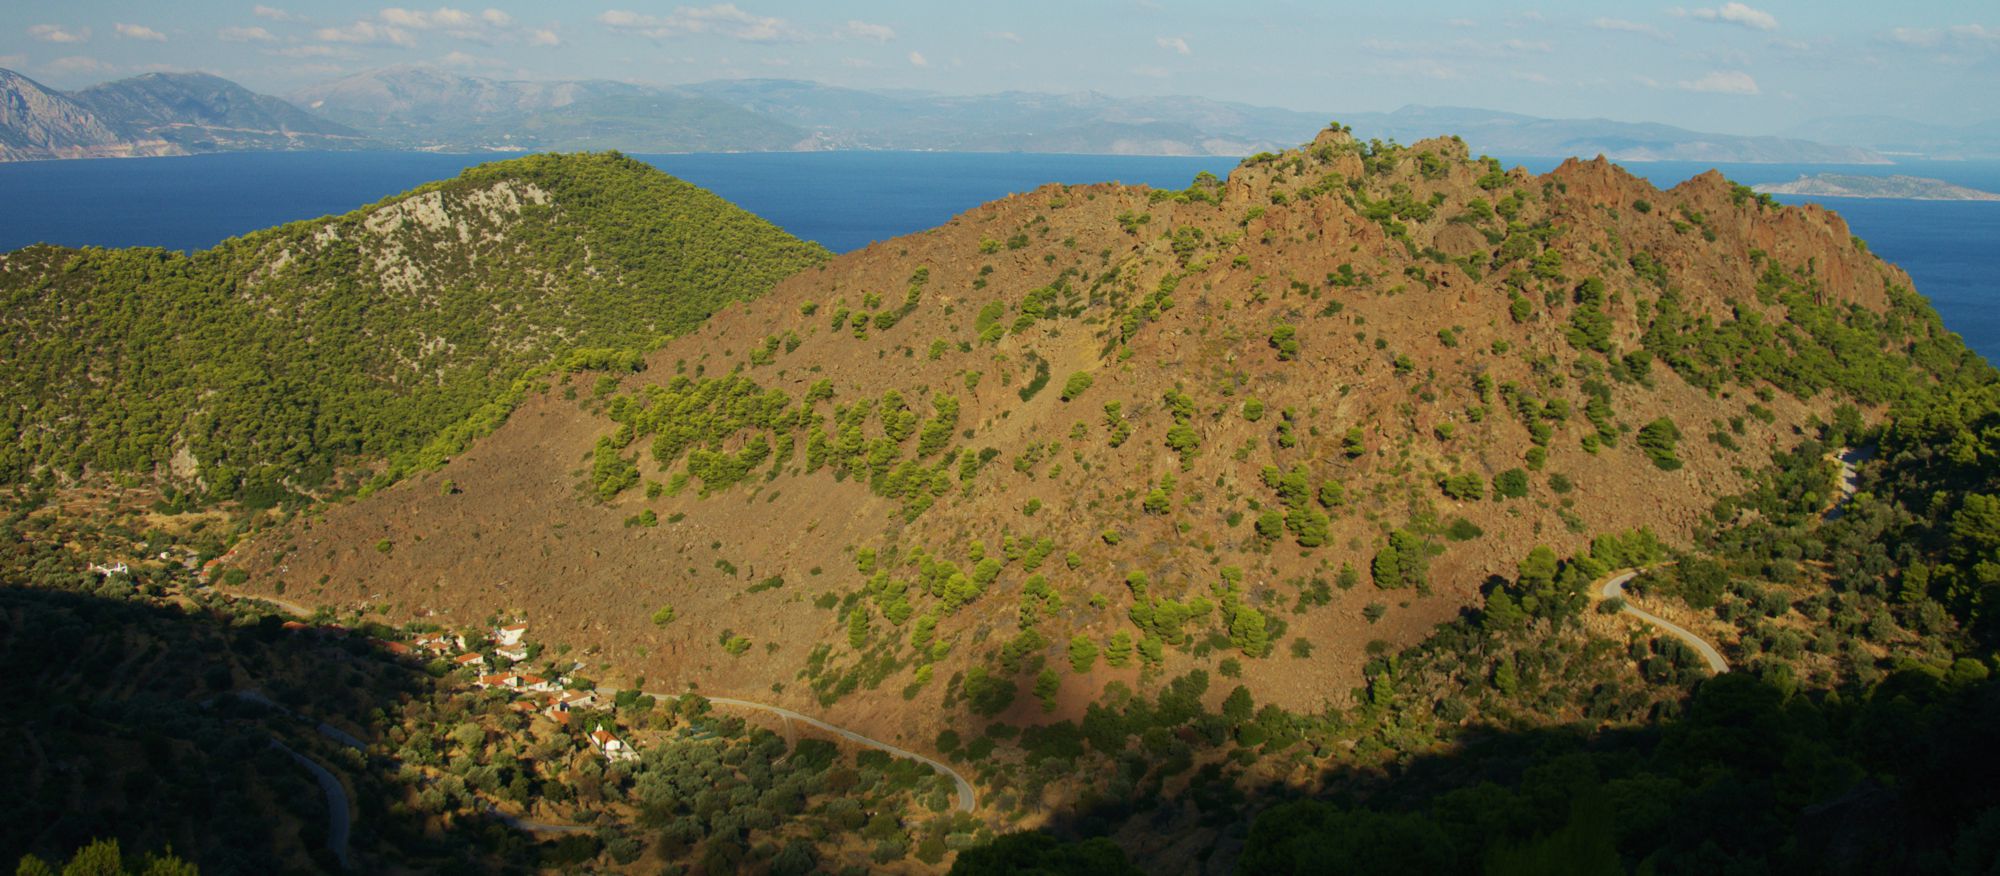 Methana topoguide: Kameni volcano relief is covered by low phrygana and scattered pines